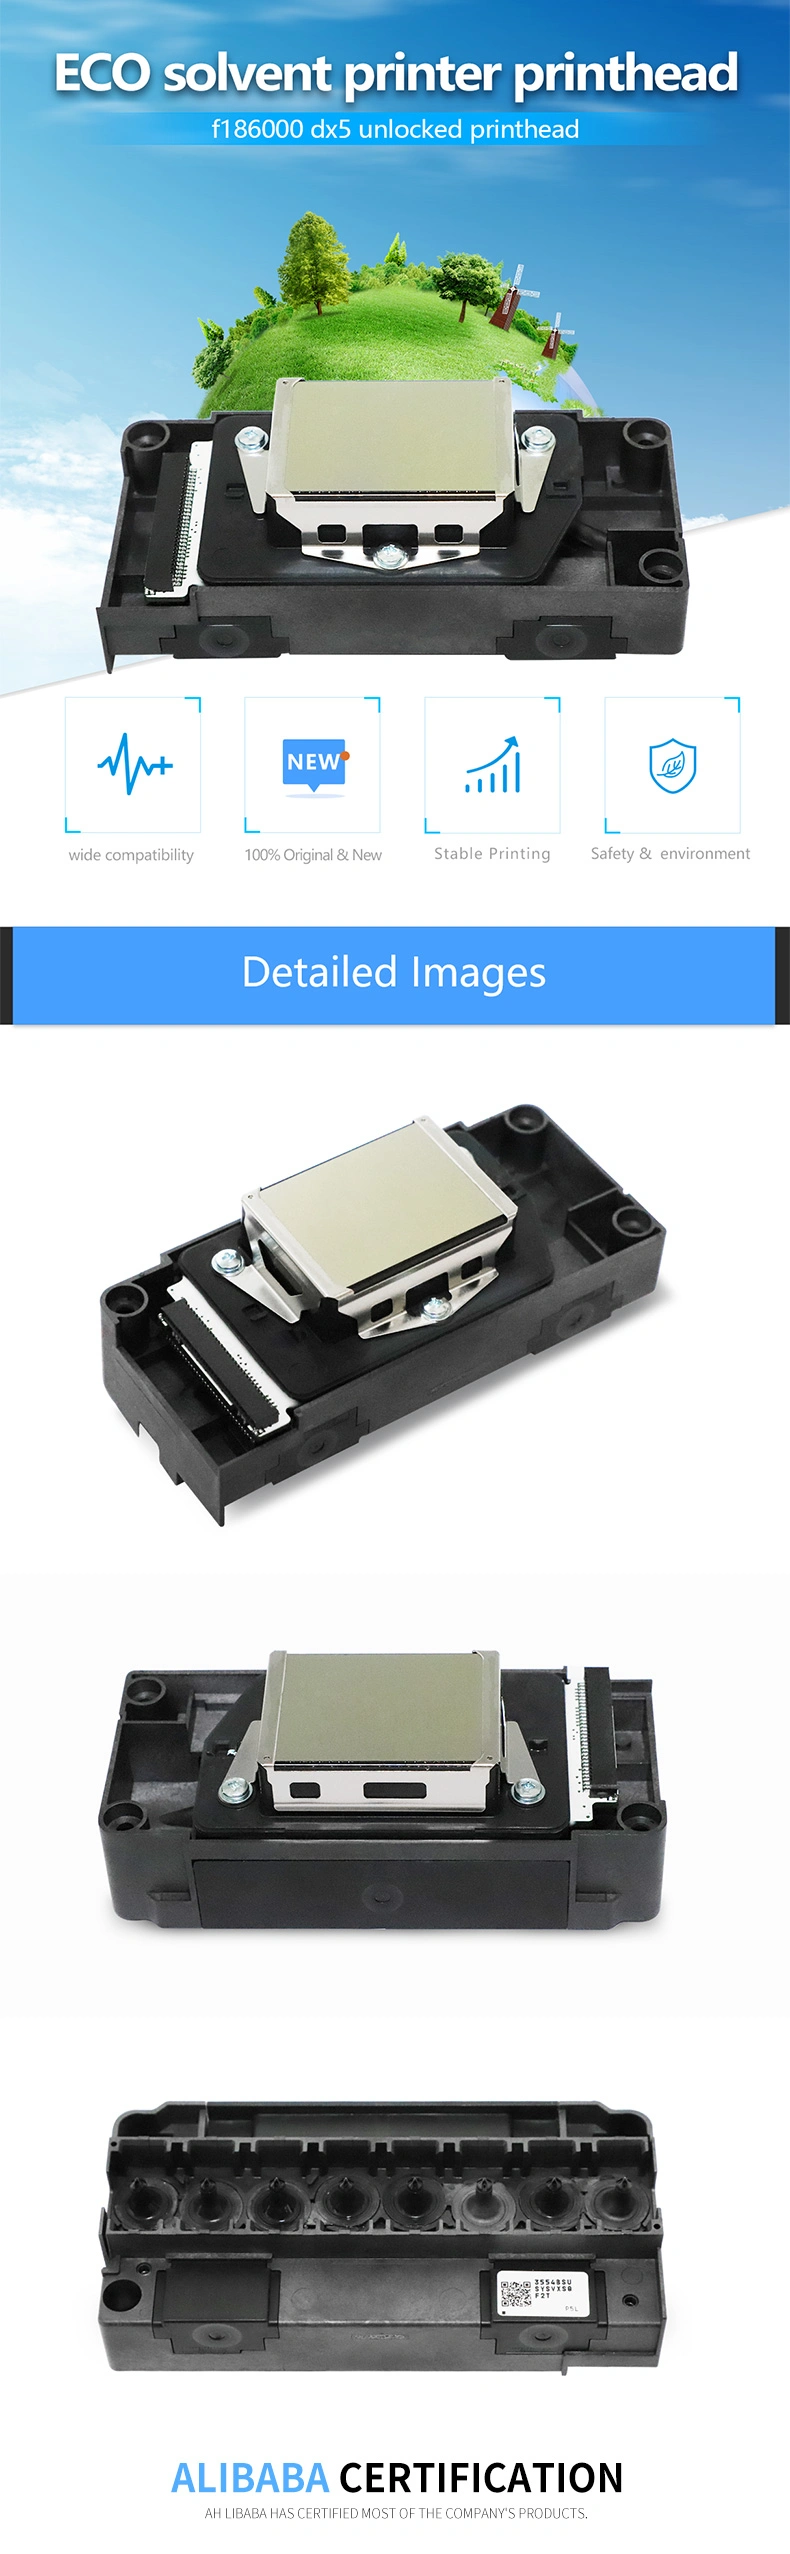 Unlcoked F186000 Printhead Dx5 for Eco Solvent Printer for All-Win Xuli Eco Solvent Printer